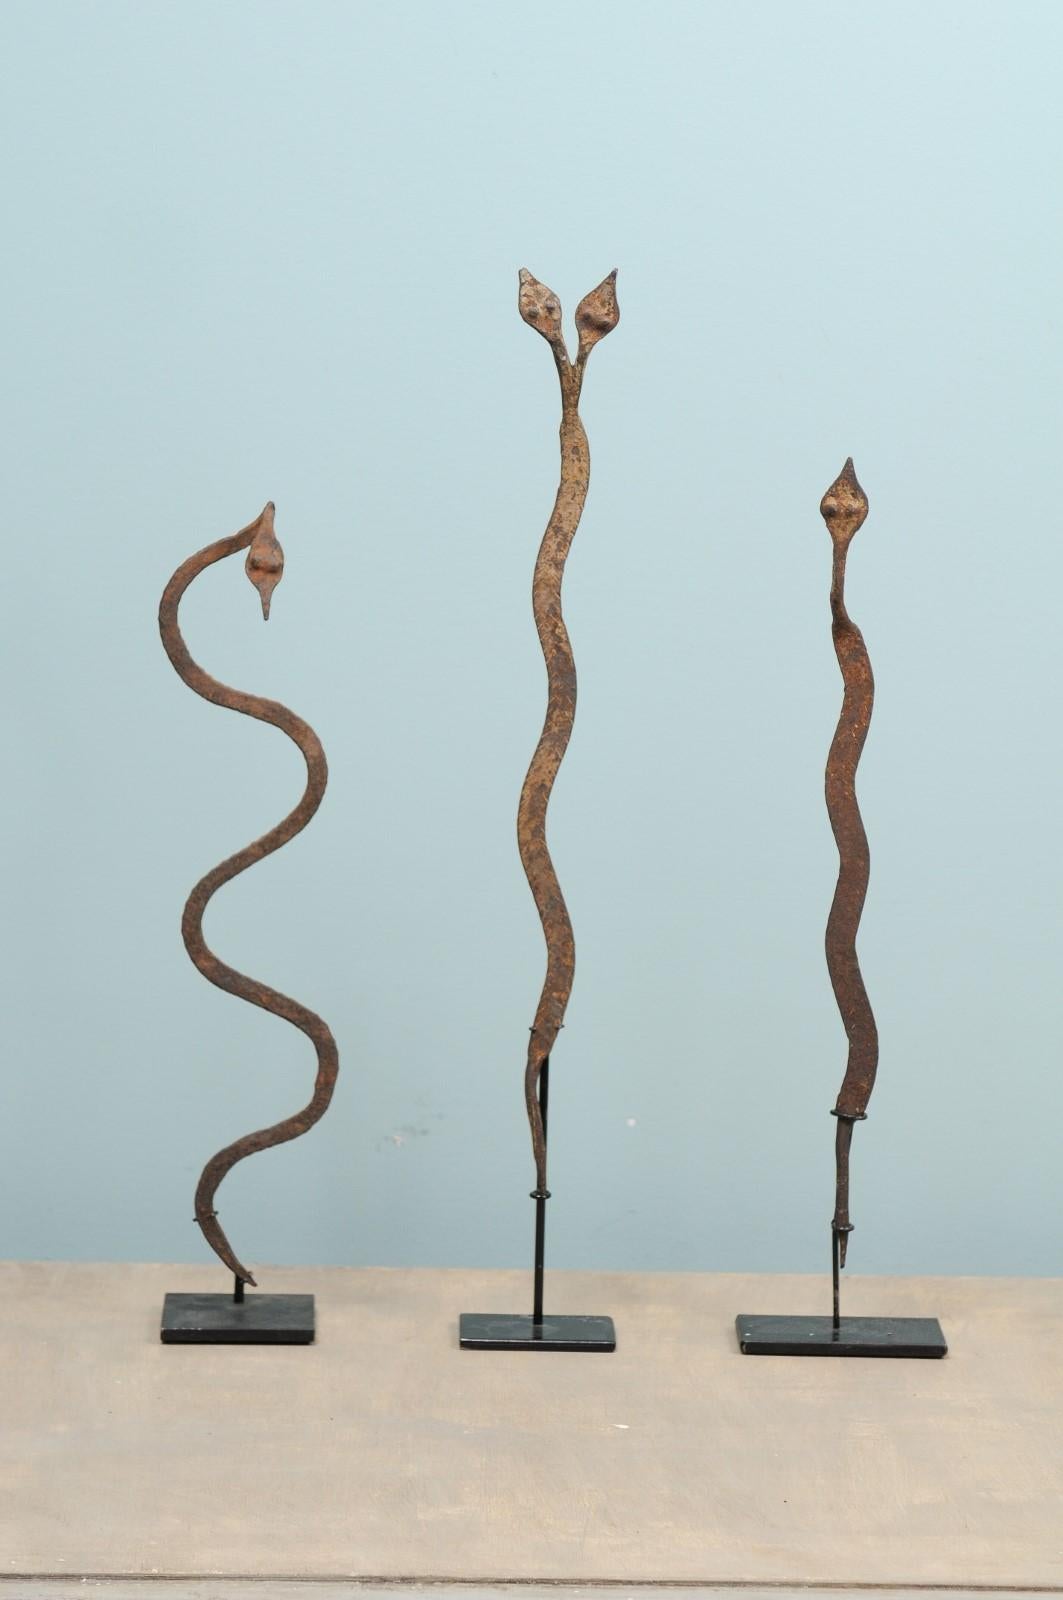 A collection of Burkina Faso currency from the mid-20th century. This assortment of three vintage African ritual iron snakes effigies originate from the Lobi tribe of Burkina Faso. These serpent shaped currencies are made of iron, have a lovely